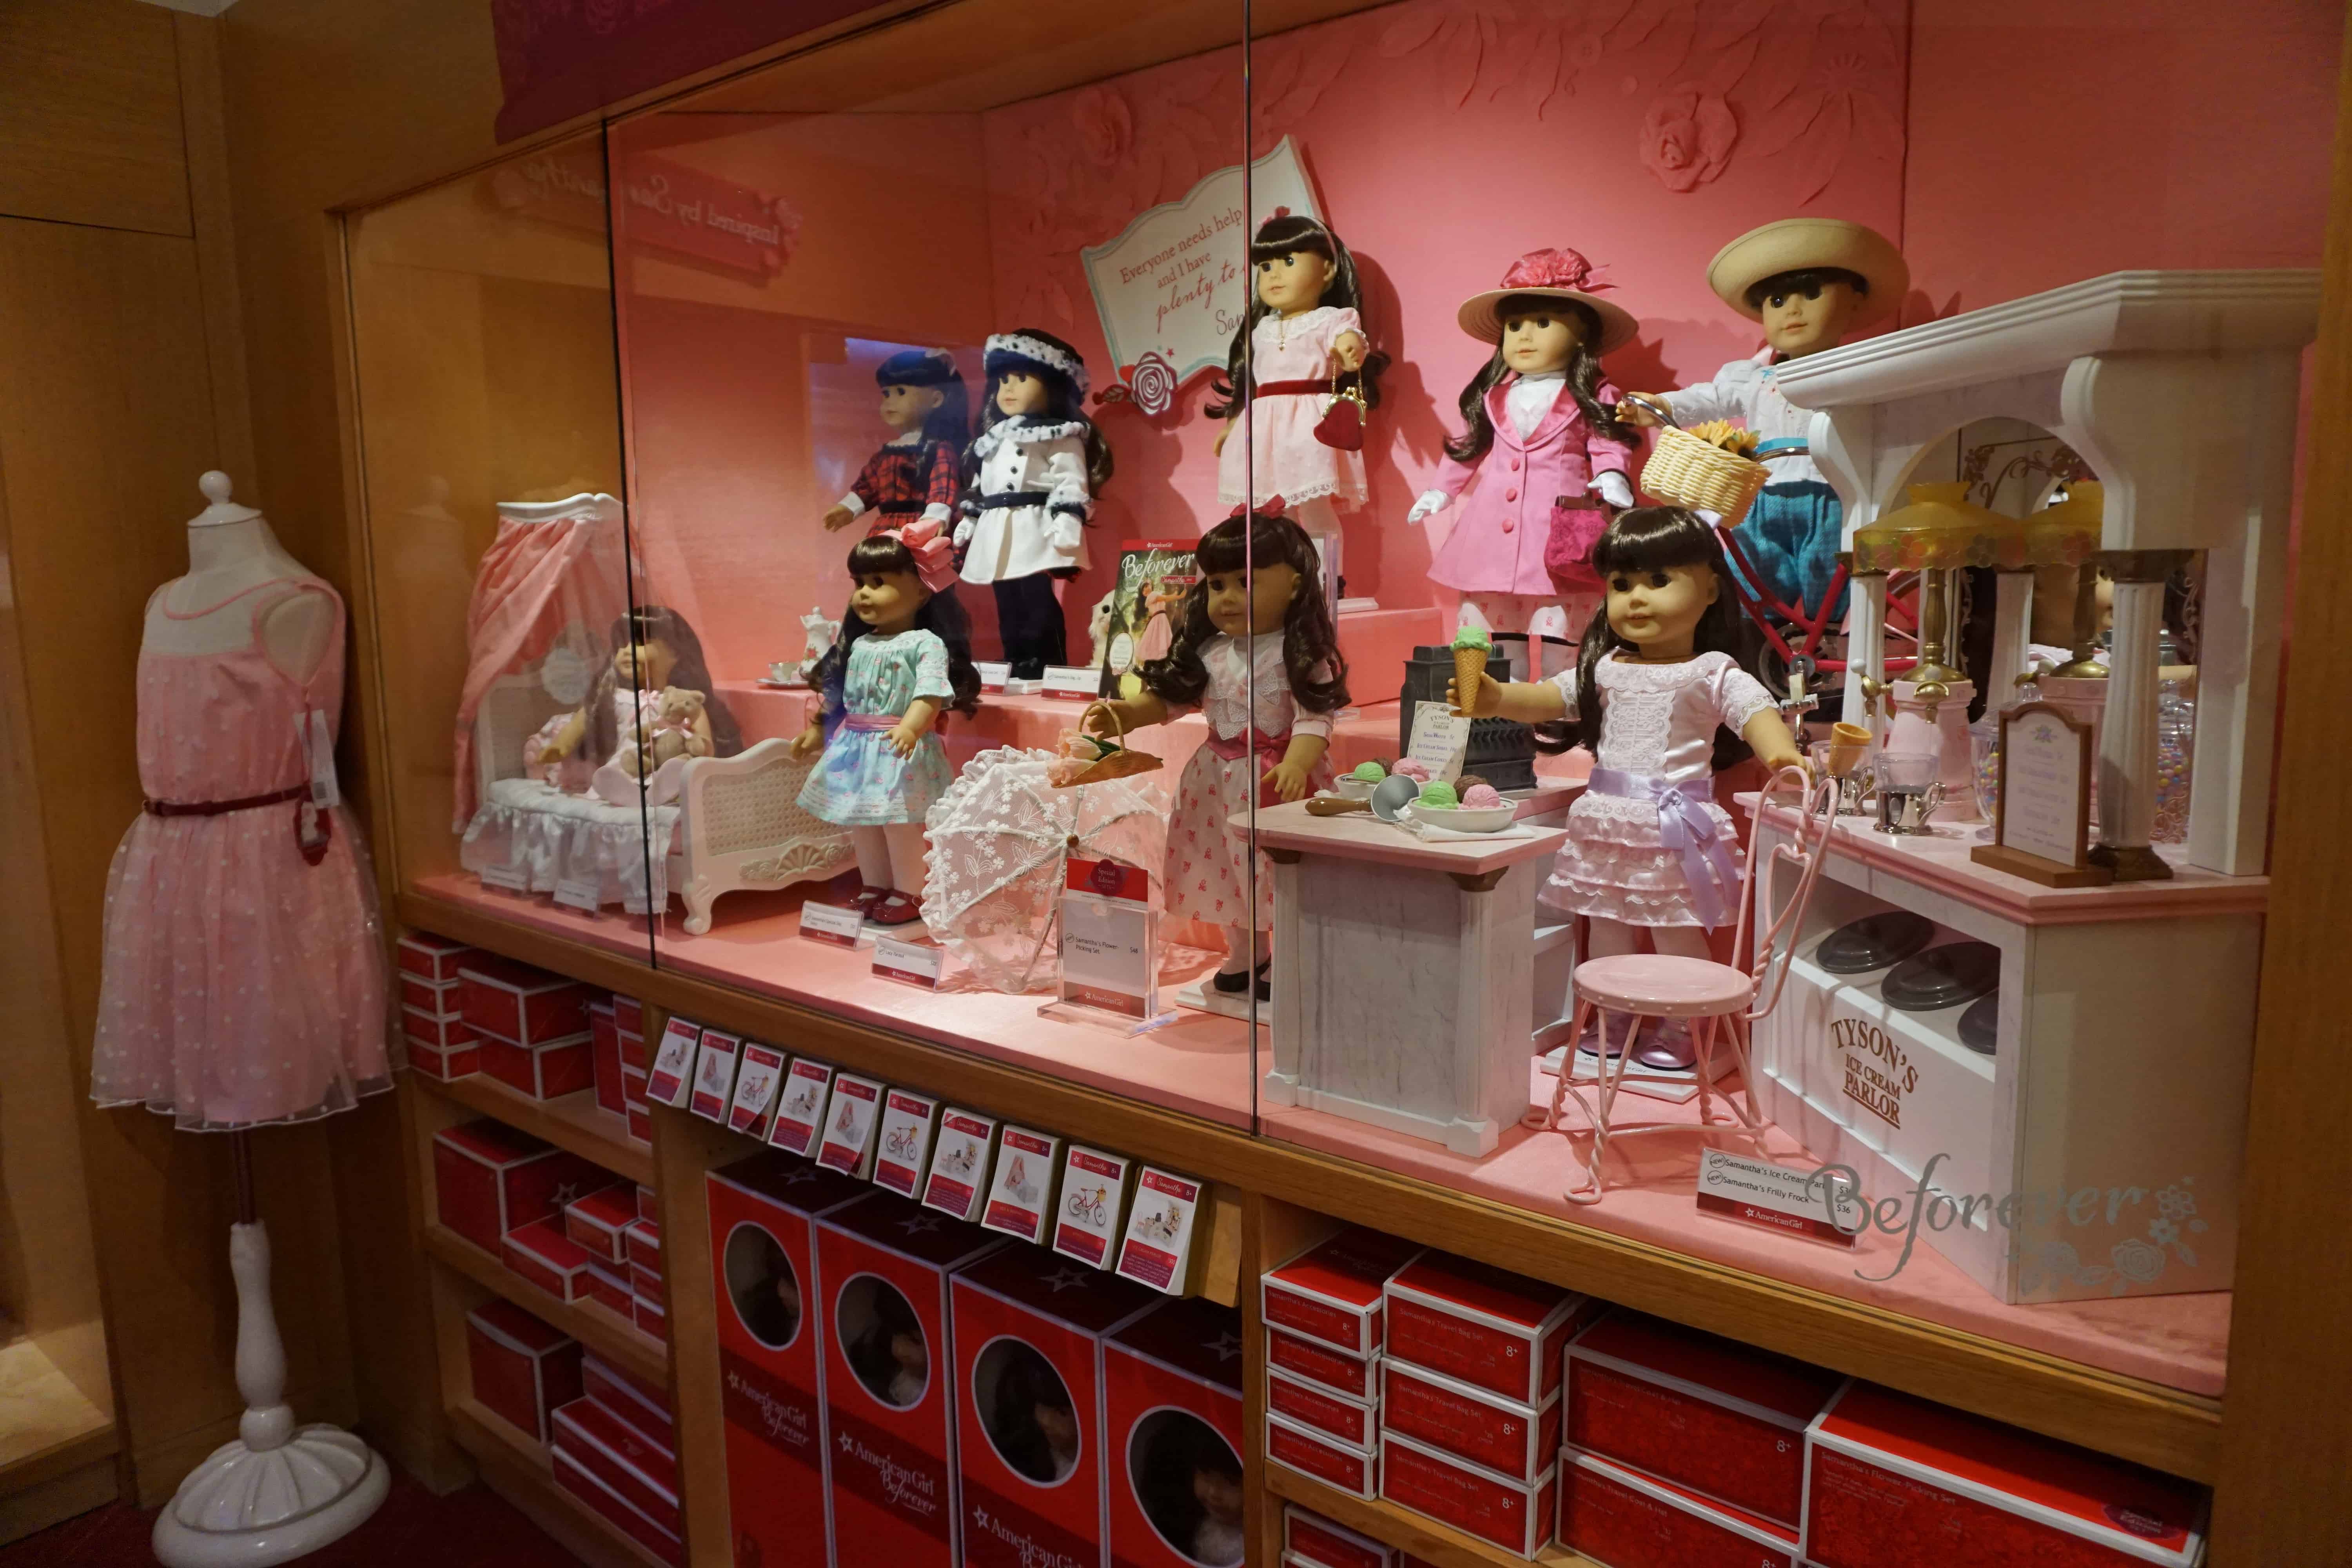 11 Tips For An Unforgettable Visit To An American Girl Store - Gone